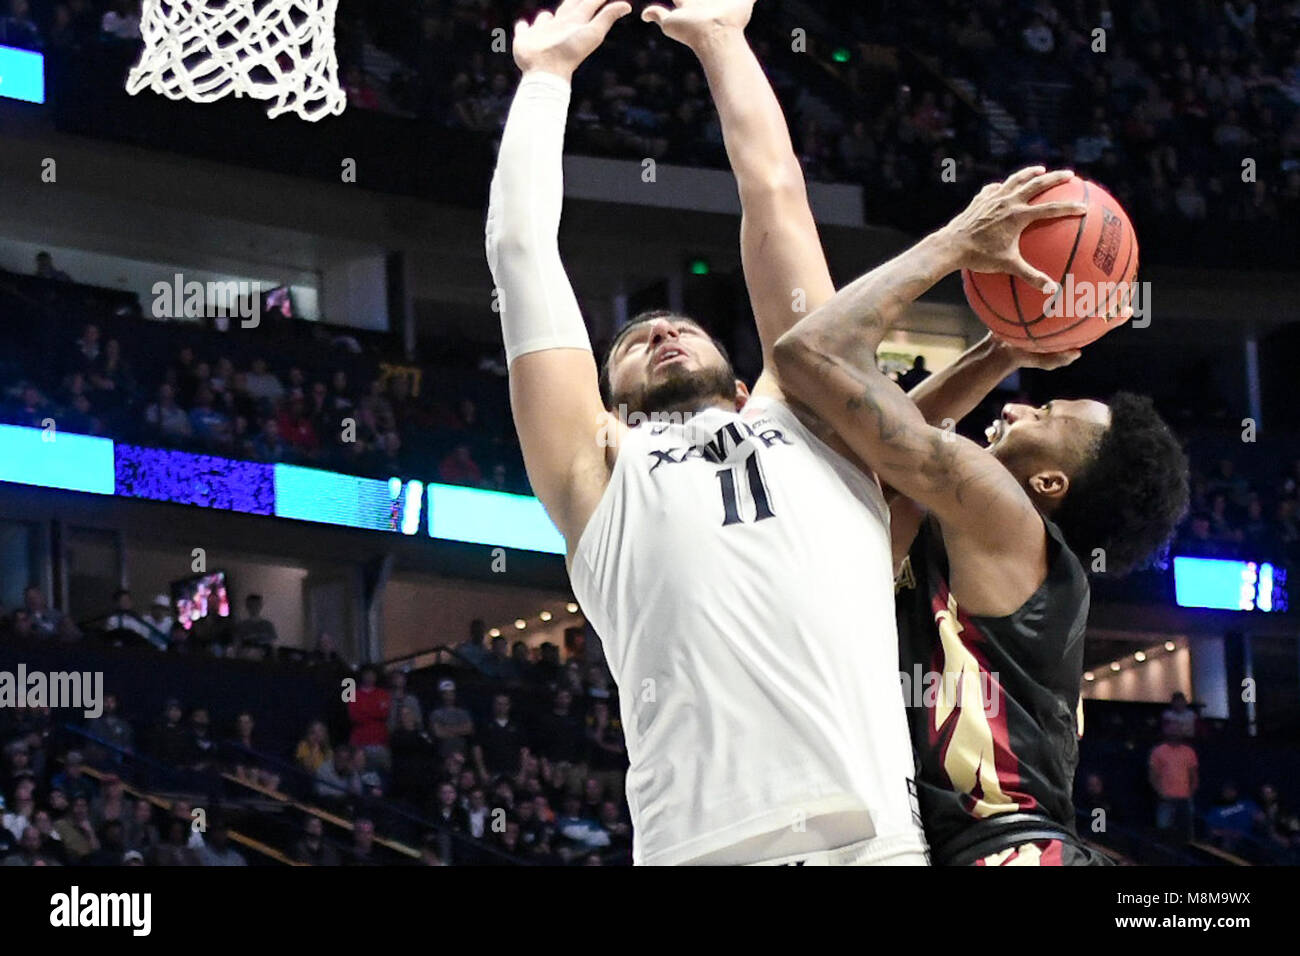 Nashville, Tennessee, USA. 18th Mar, 2018. Florida State Seminoles guard Braian Angola (11) tries to shoot over Xavier Musketeers forward Kerem Kanter (11) at Bridgestone Arena on March 18, 2018 in Nashville, Tennessee. Credit: FGS Sports/Alamy Live News Stock Photo